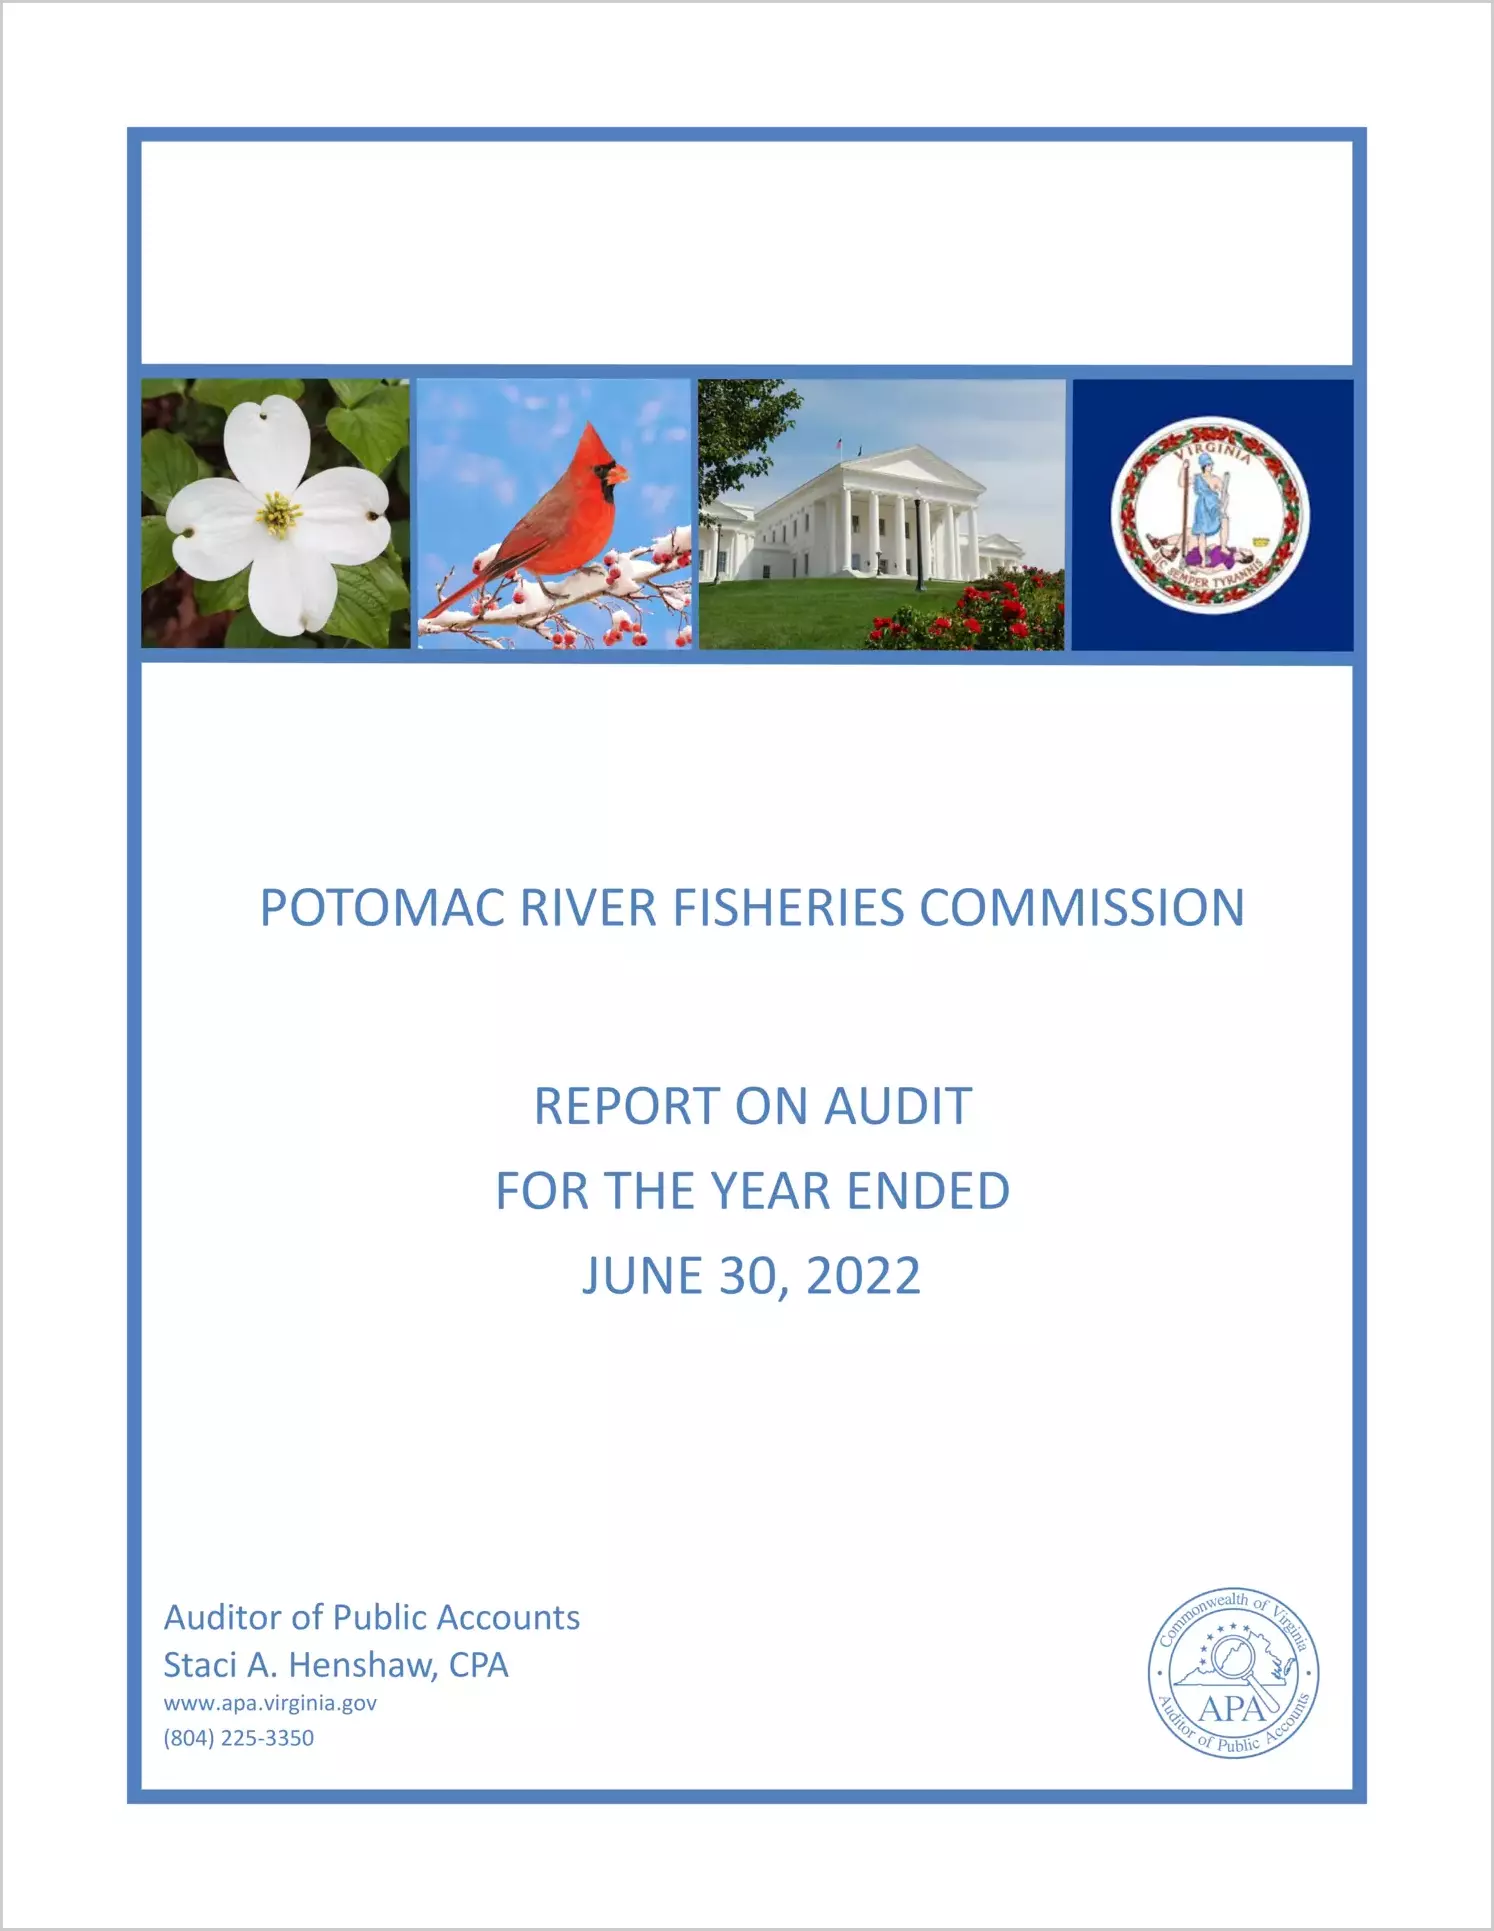 Potomac River Fisheries Commission for the year ended June 30, 2022